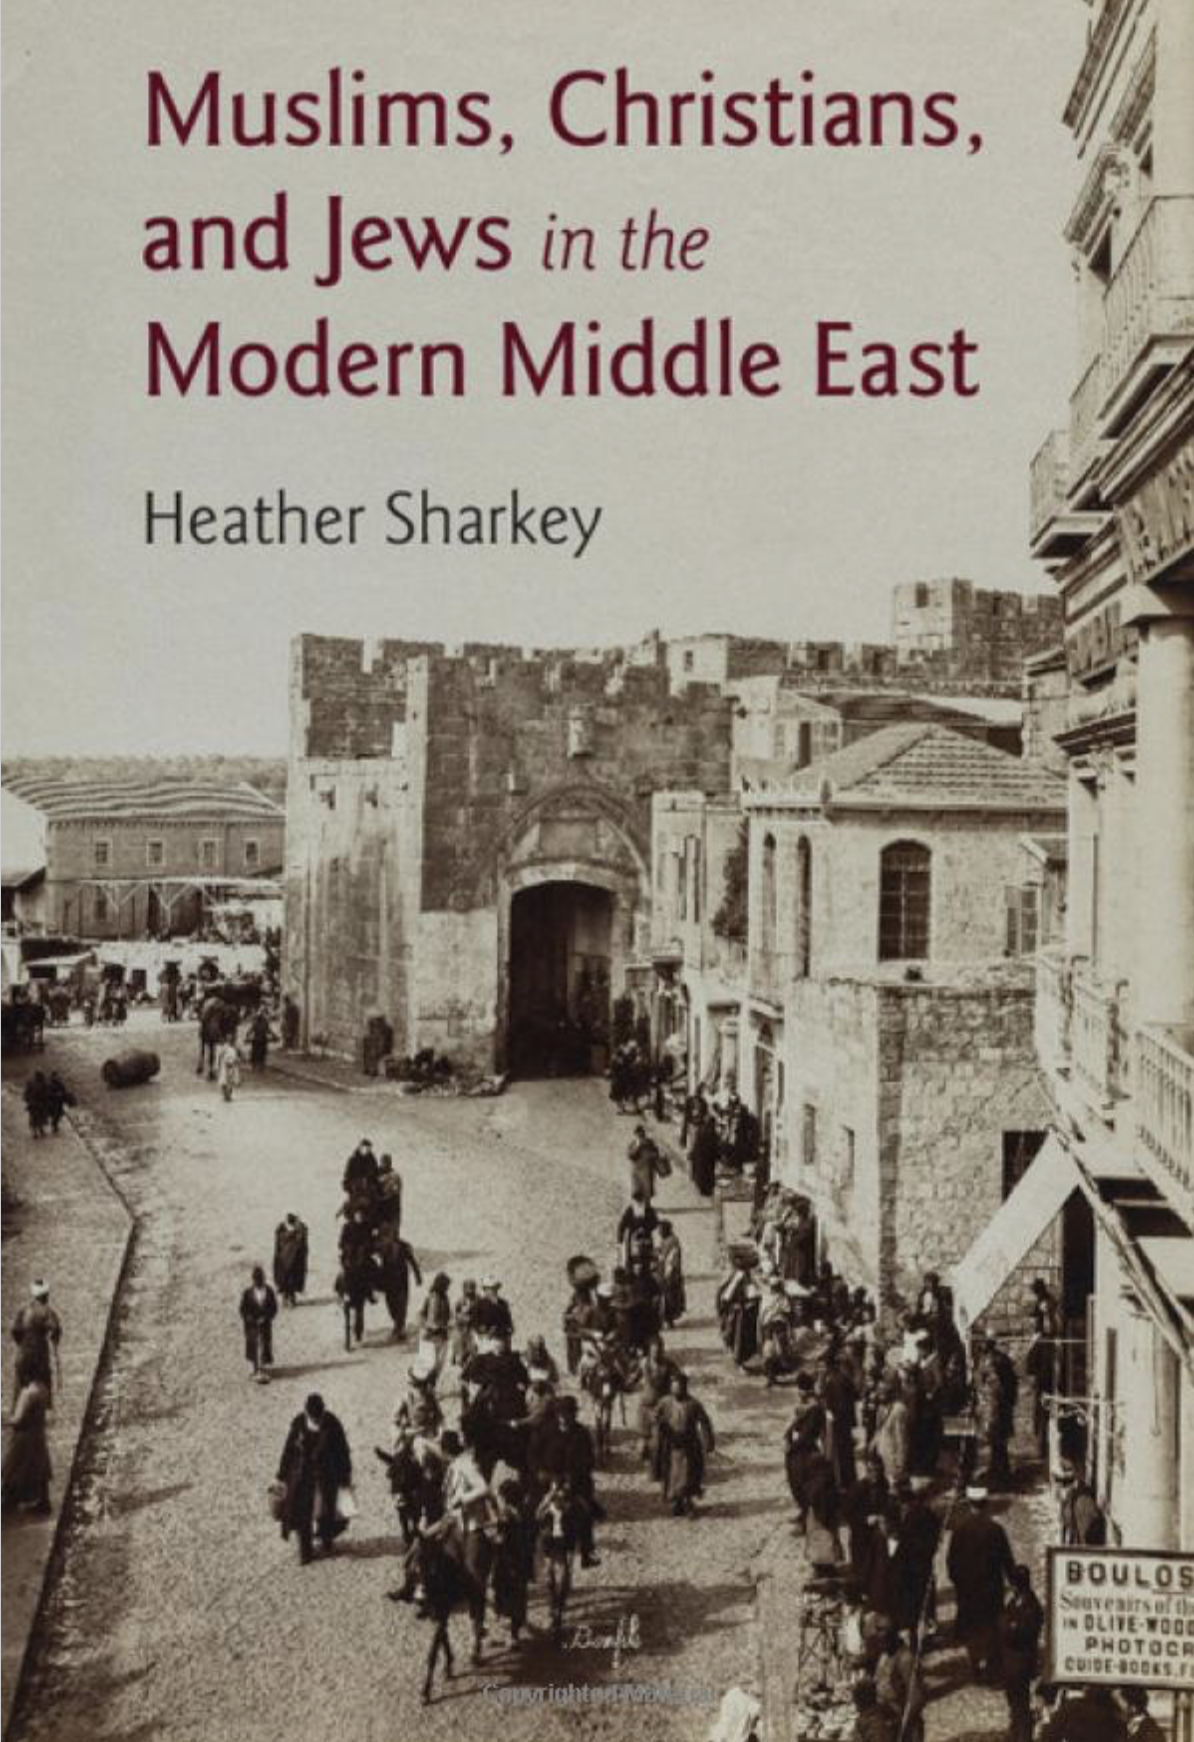 Photo Of Book Cover For The Book Entitled A History Of Muslims, Christians, And Jews In The Middle East